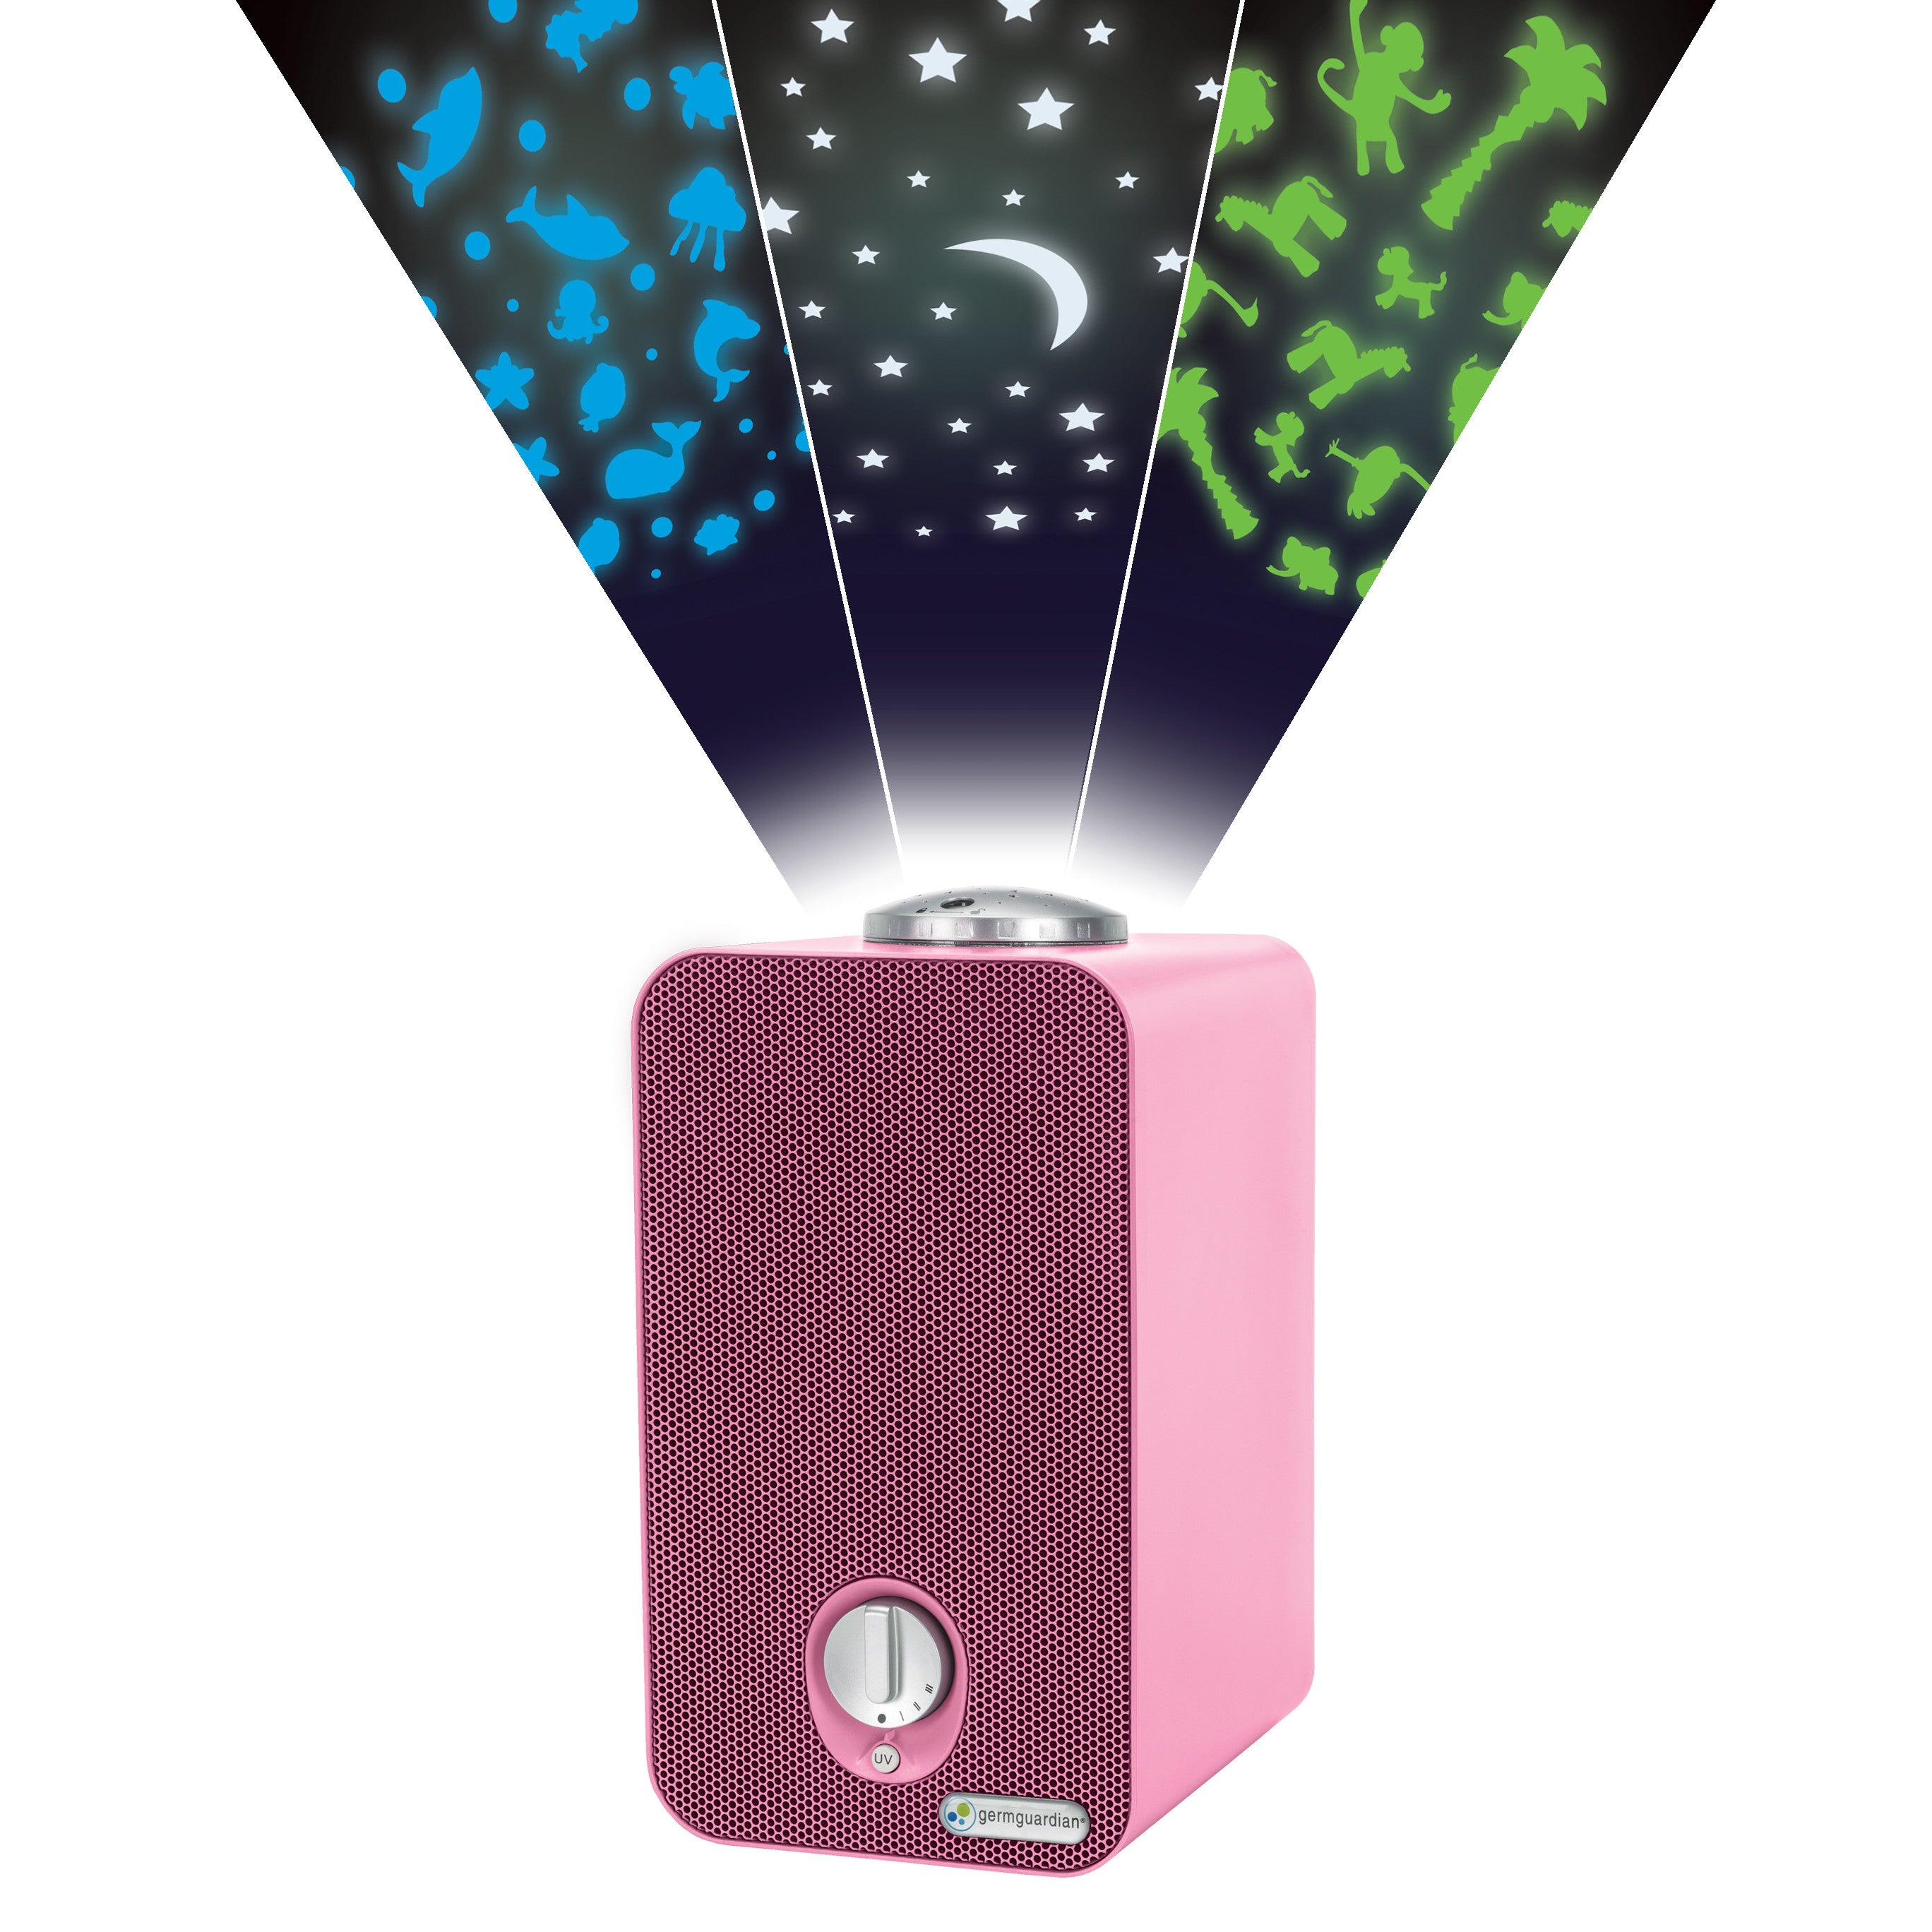 GermGuardian AC4150 4-in-1, Air Purifier with HEPA Filter, UV-C Sanitizer and Night Light Projector For Kids Room (pink)